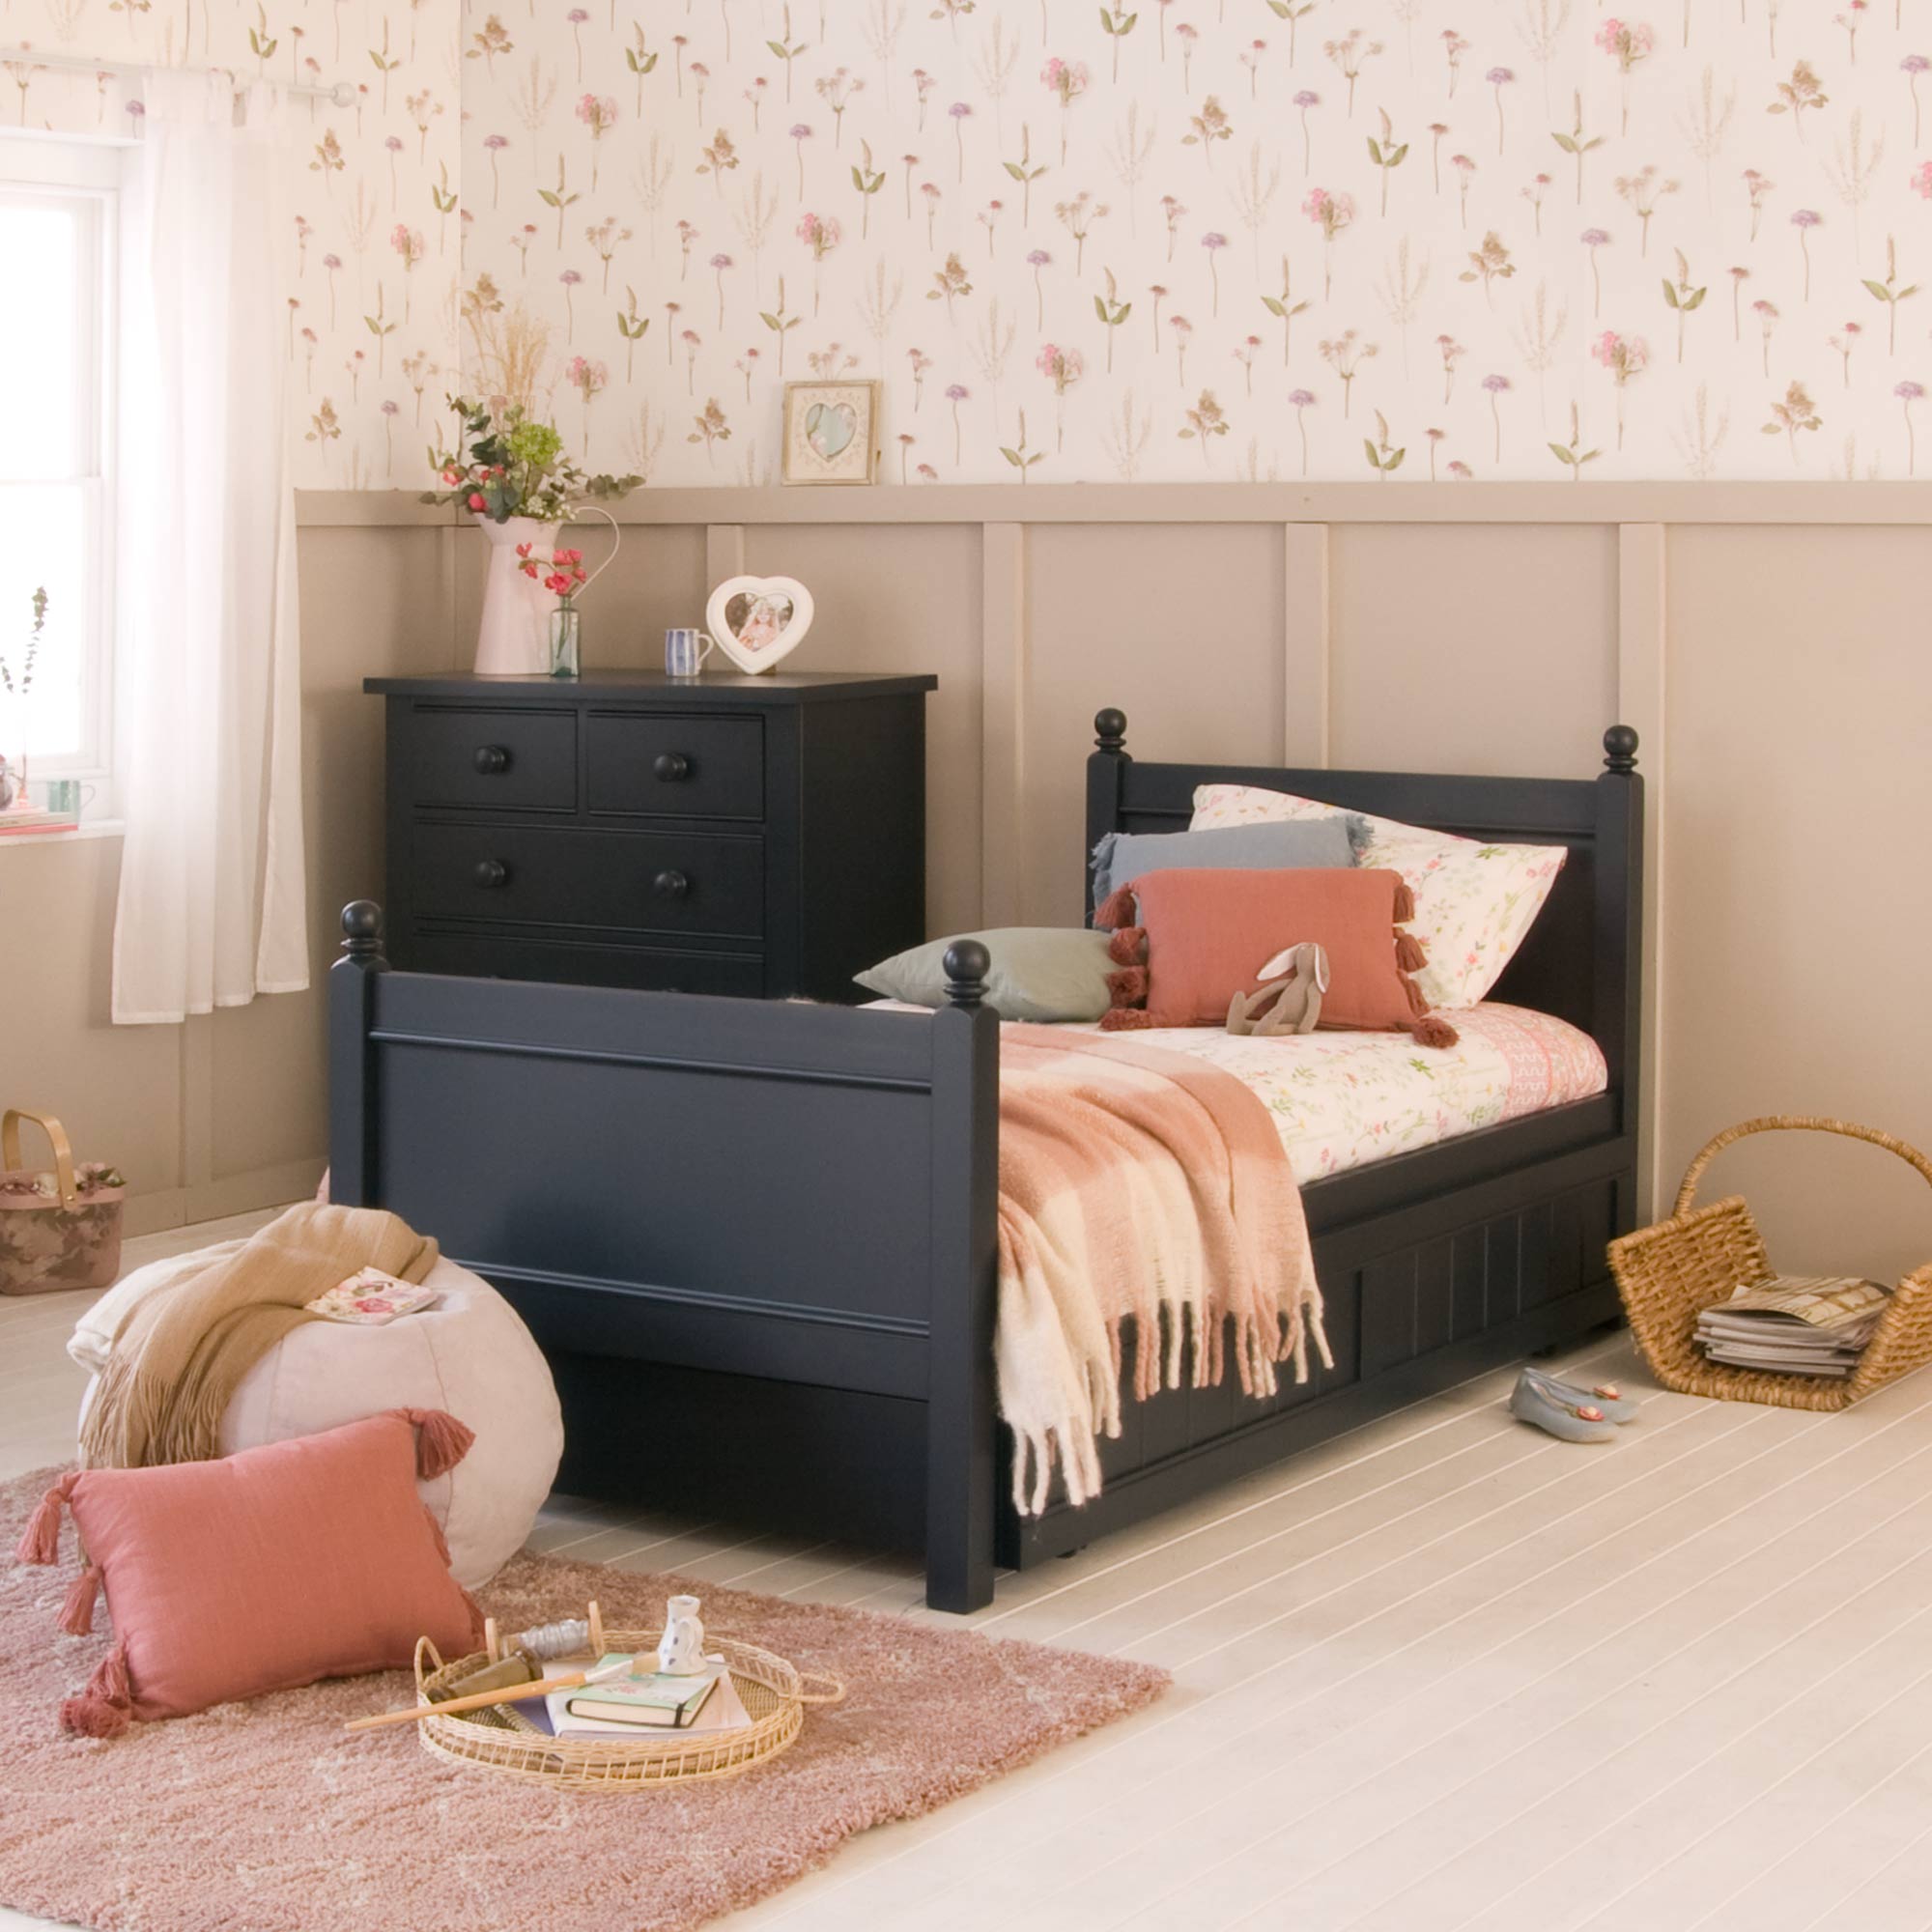 Which Children’s Bed Will Look Best In Your House?